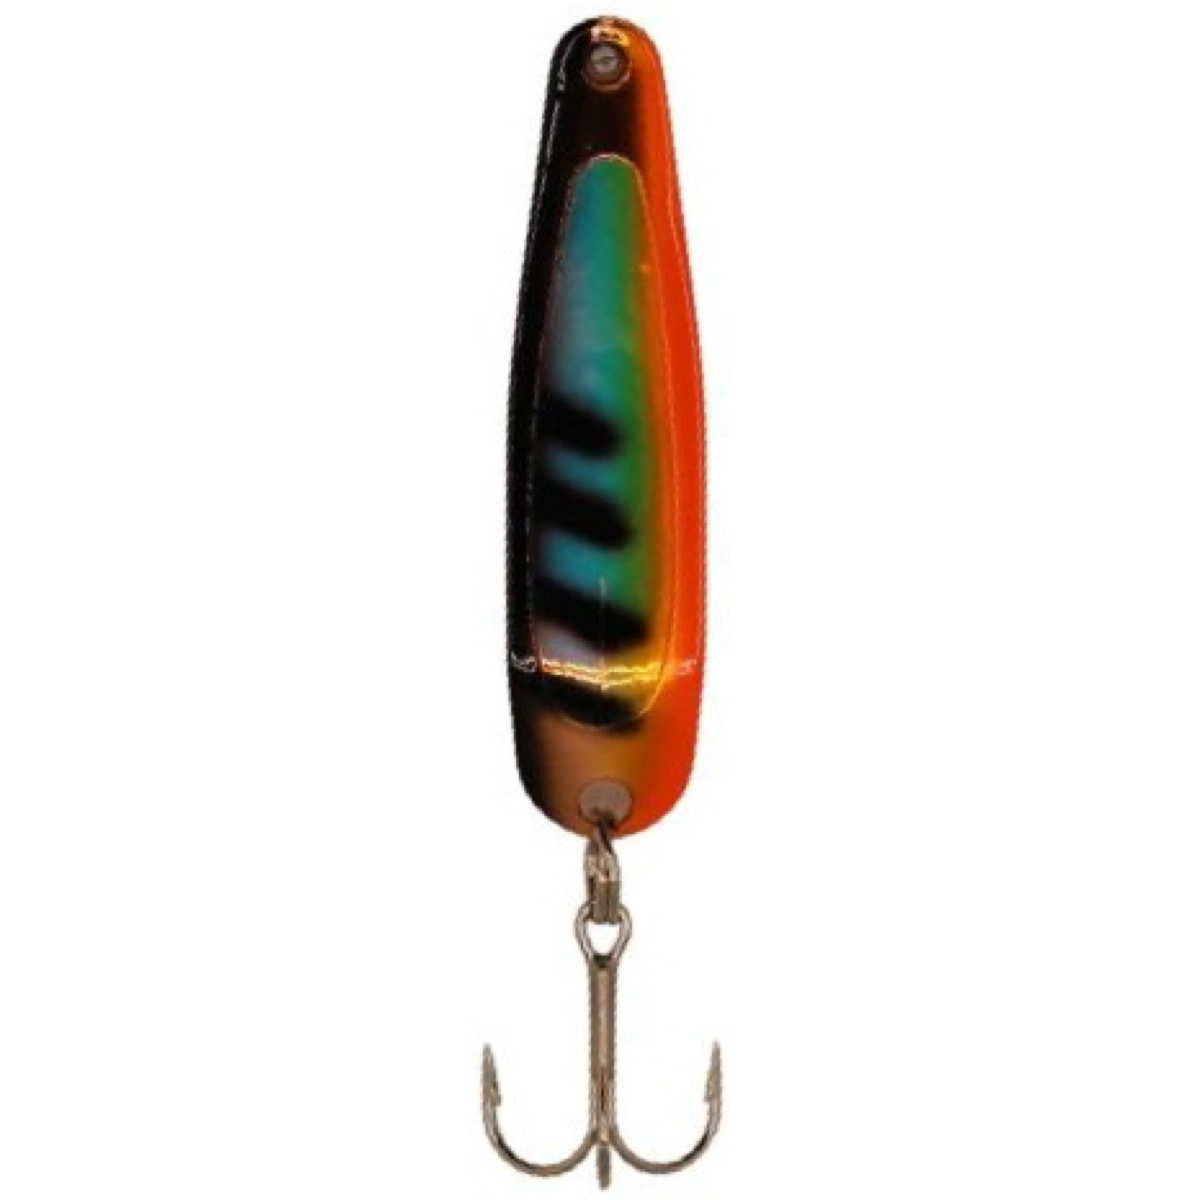 Photo of Advance Tackle Michigan Stinger Scorpion Spoon - Smooth Texture for sale at United Tackle Shops.